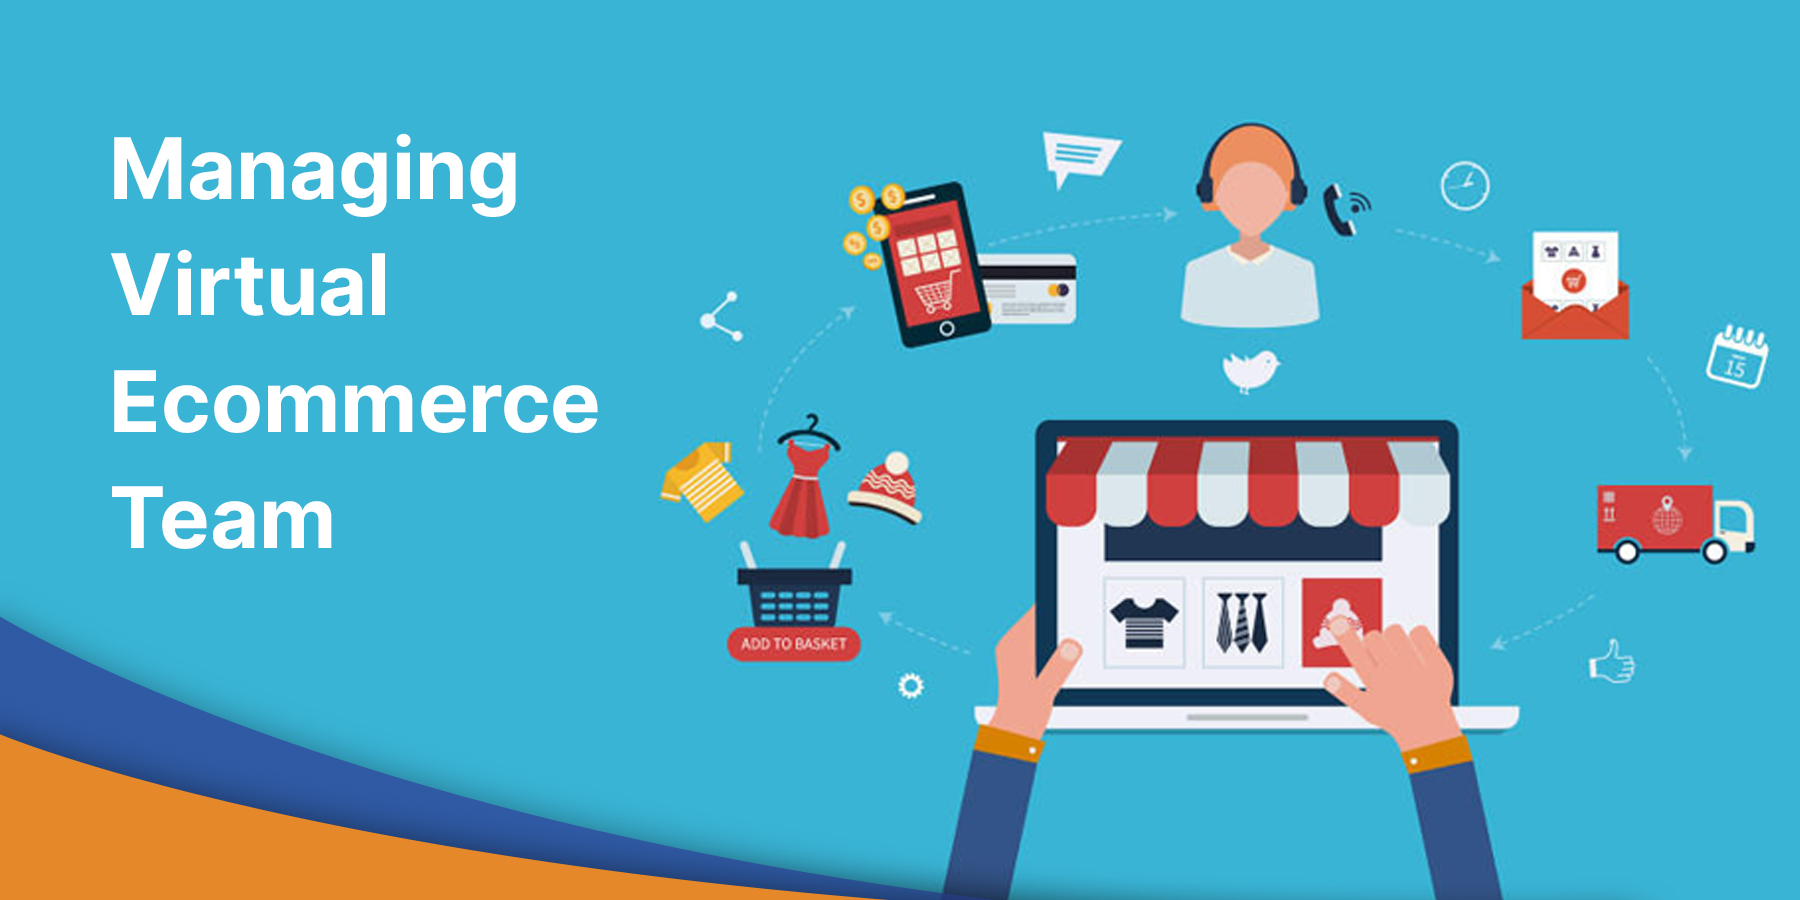 11 Tried and Tested Tips to Manage your Virtual eCommerce Team in 2021 2